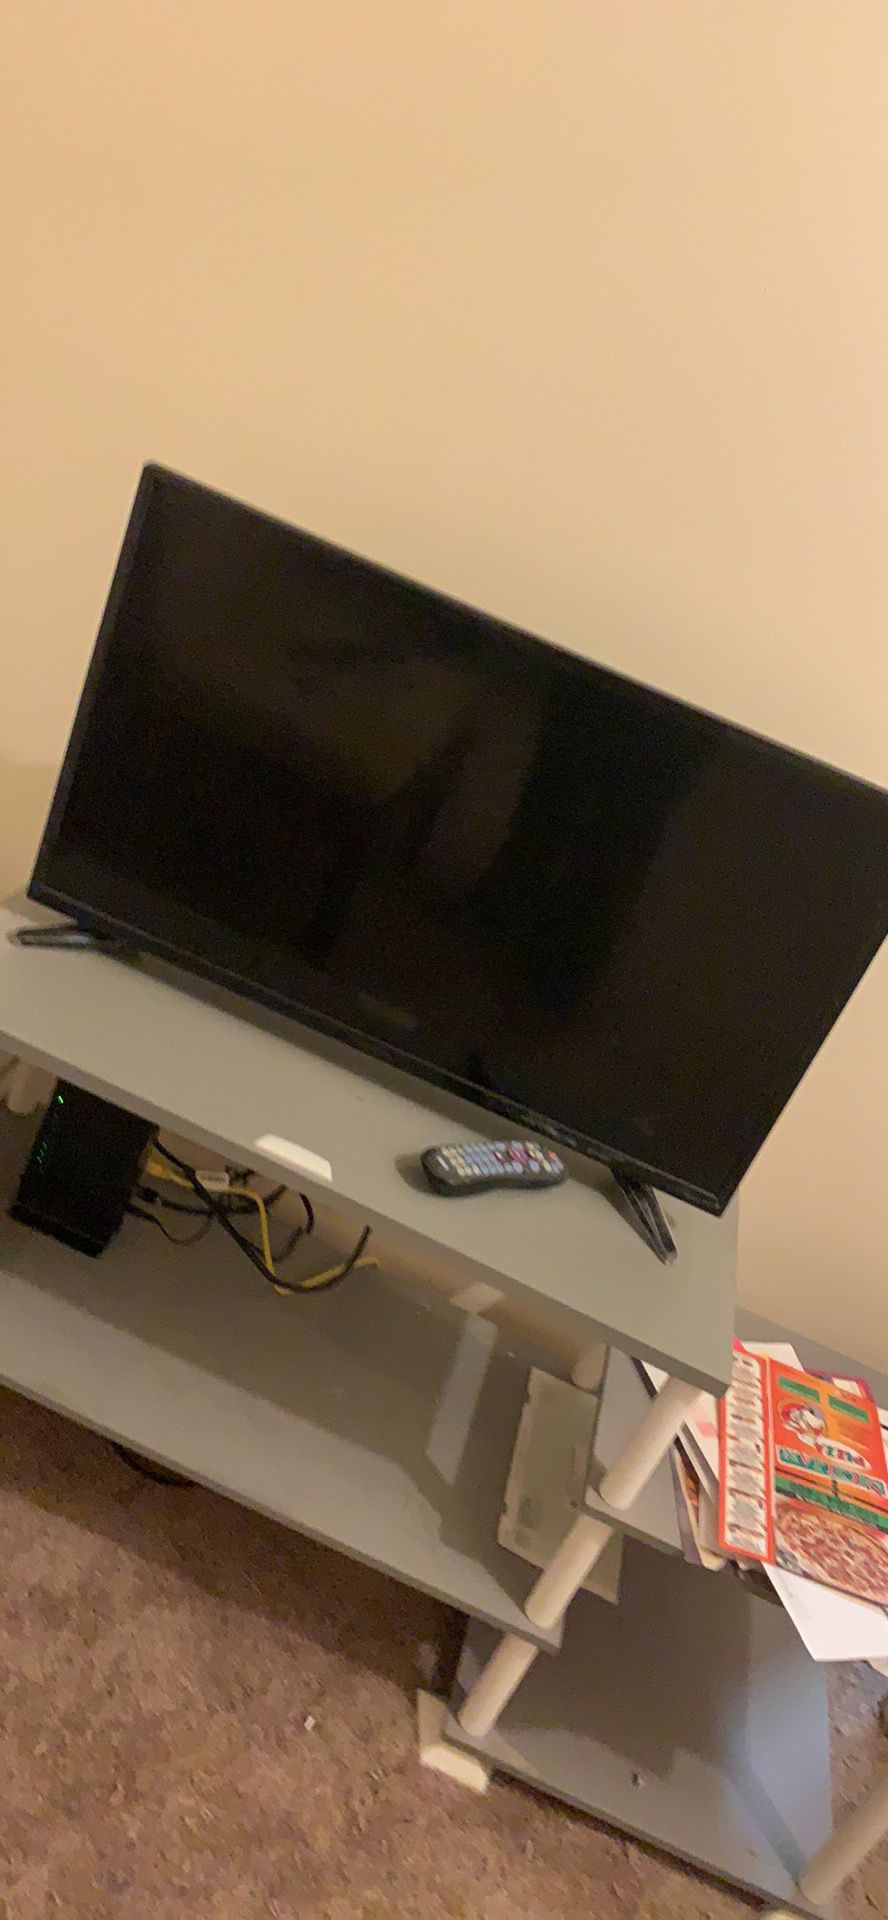 Insignia roku tv with tv stand